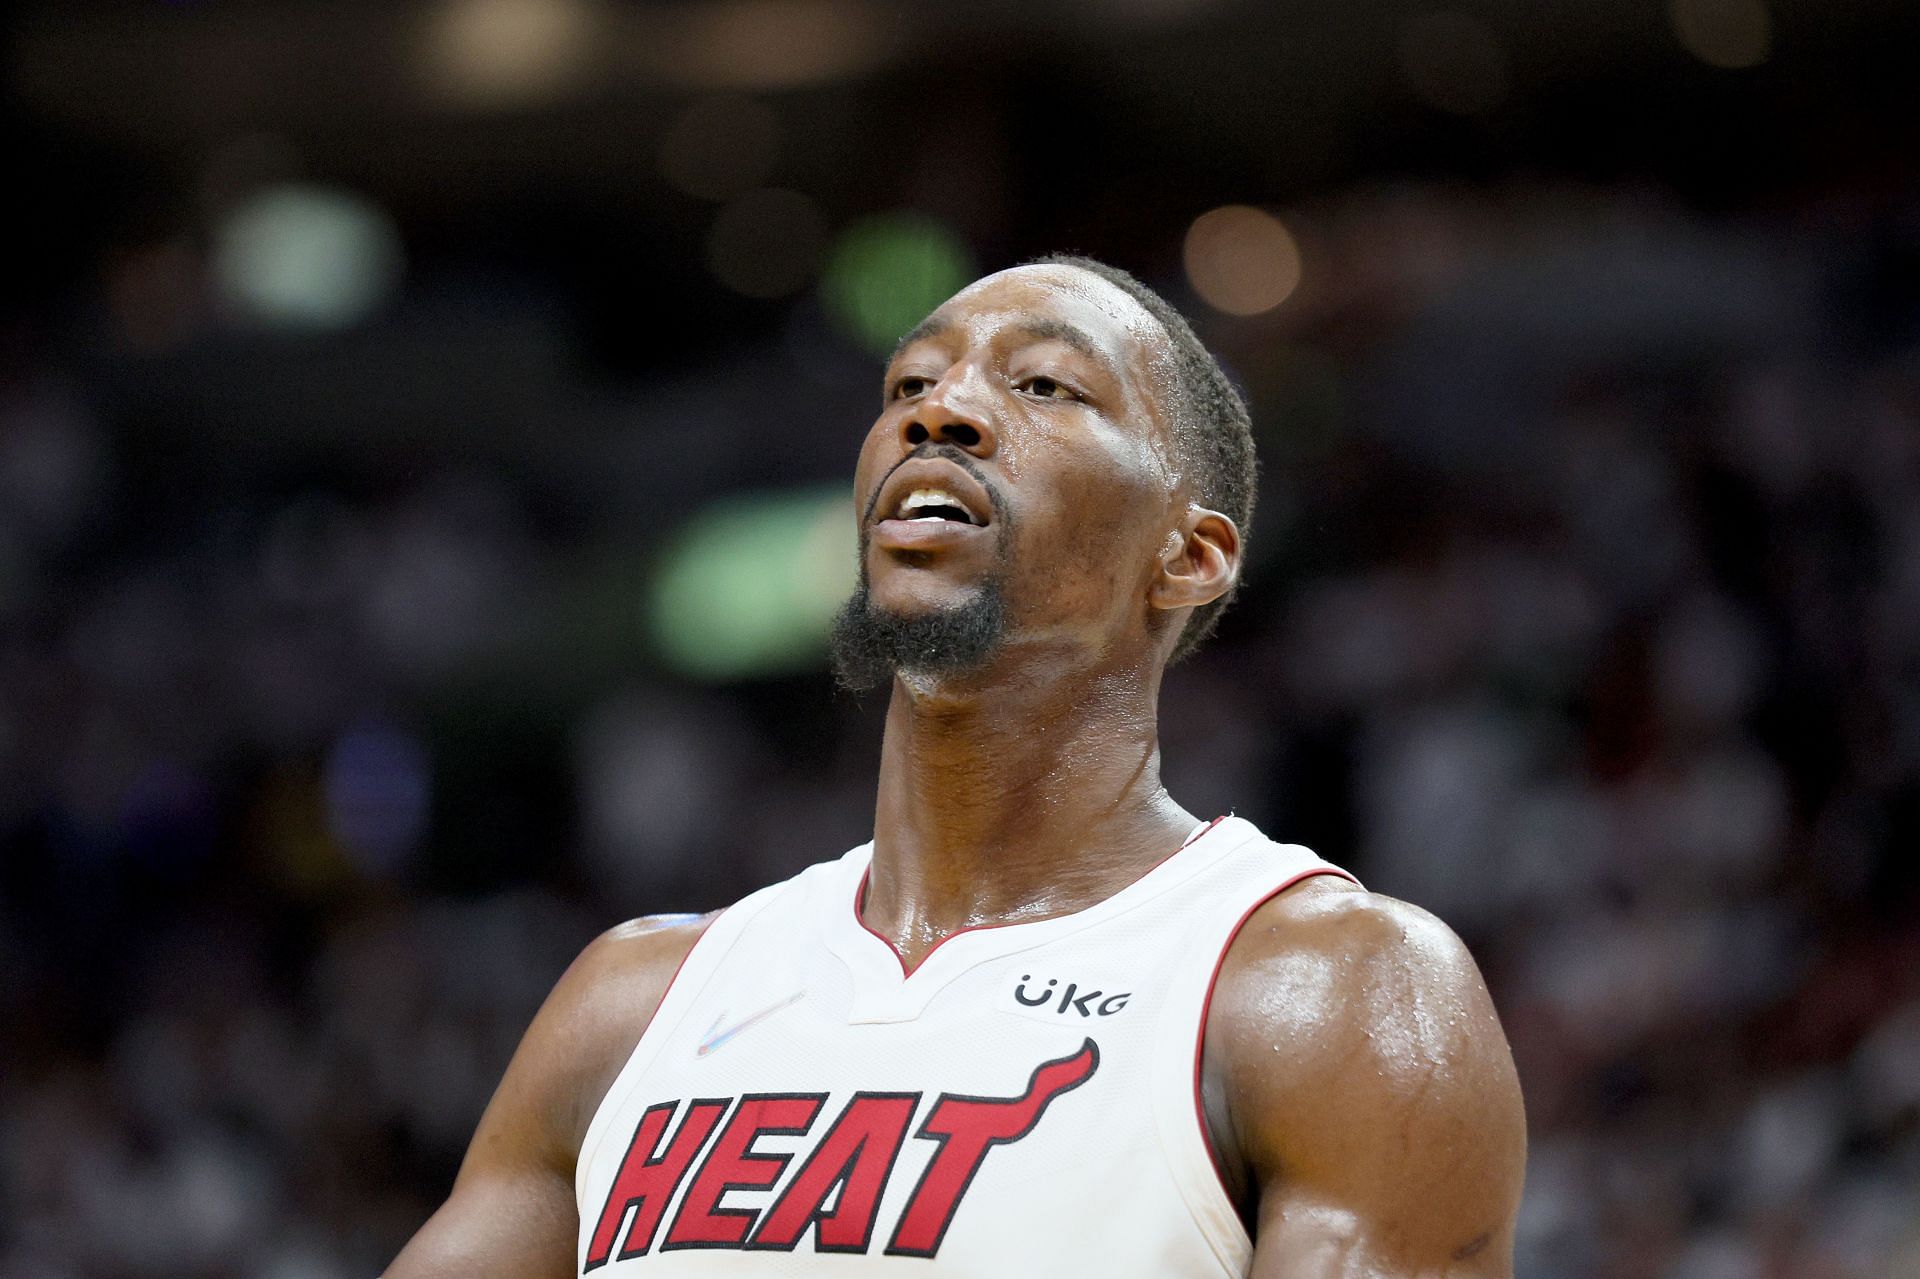 Bam Adebayo is one of the best defensive players in the NBA today.